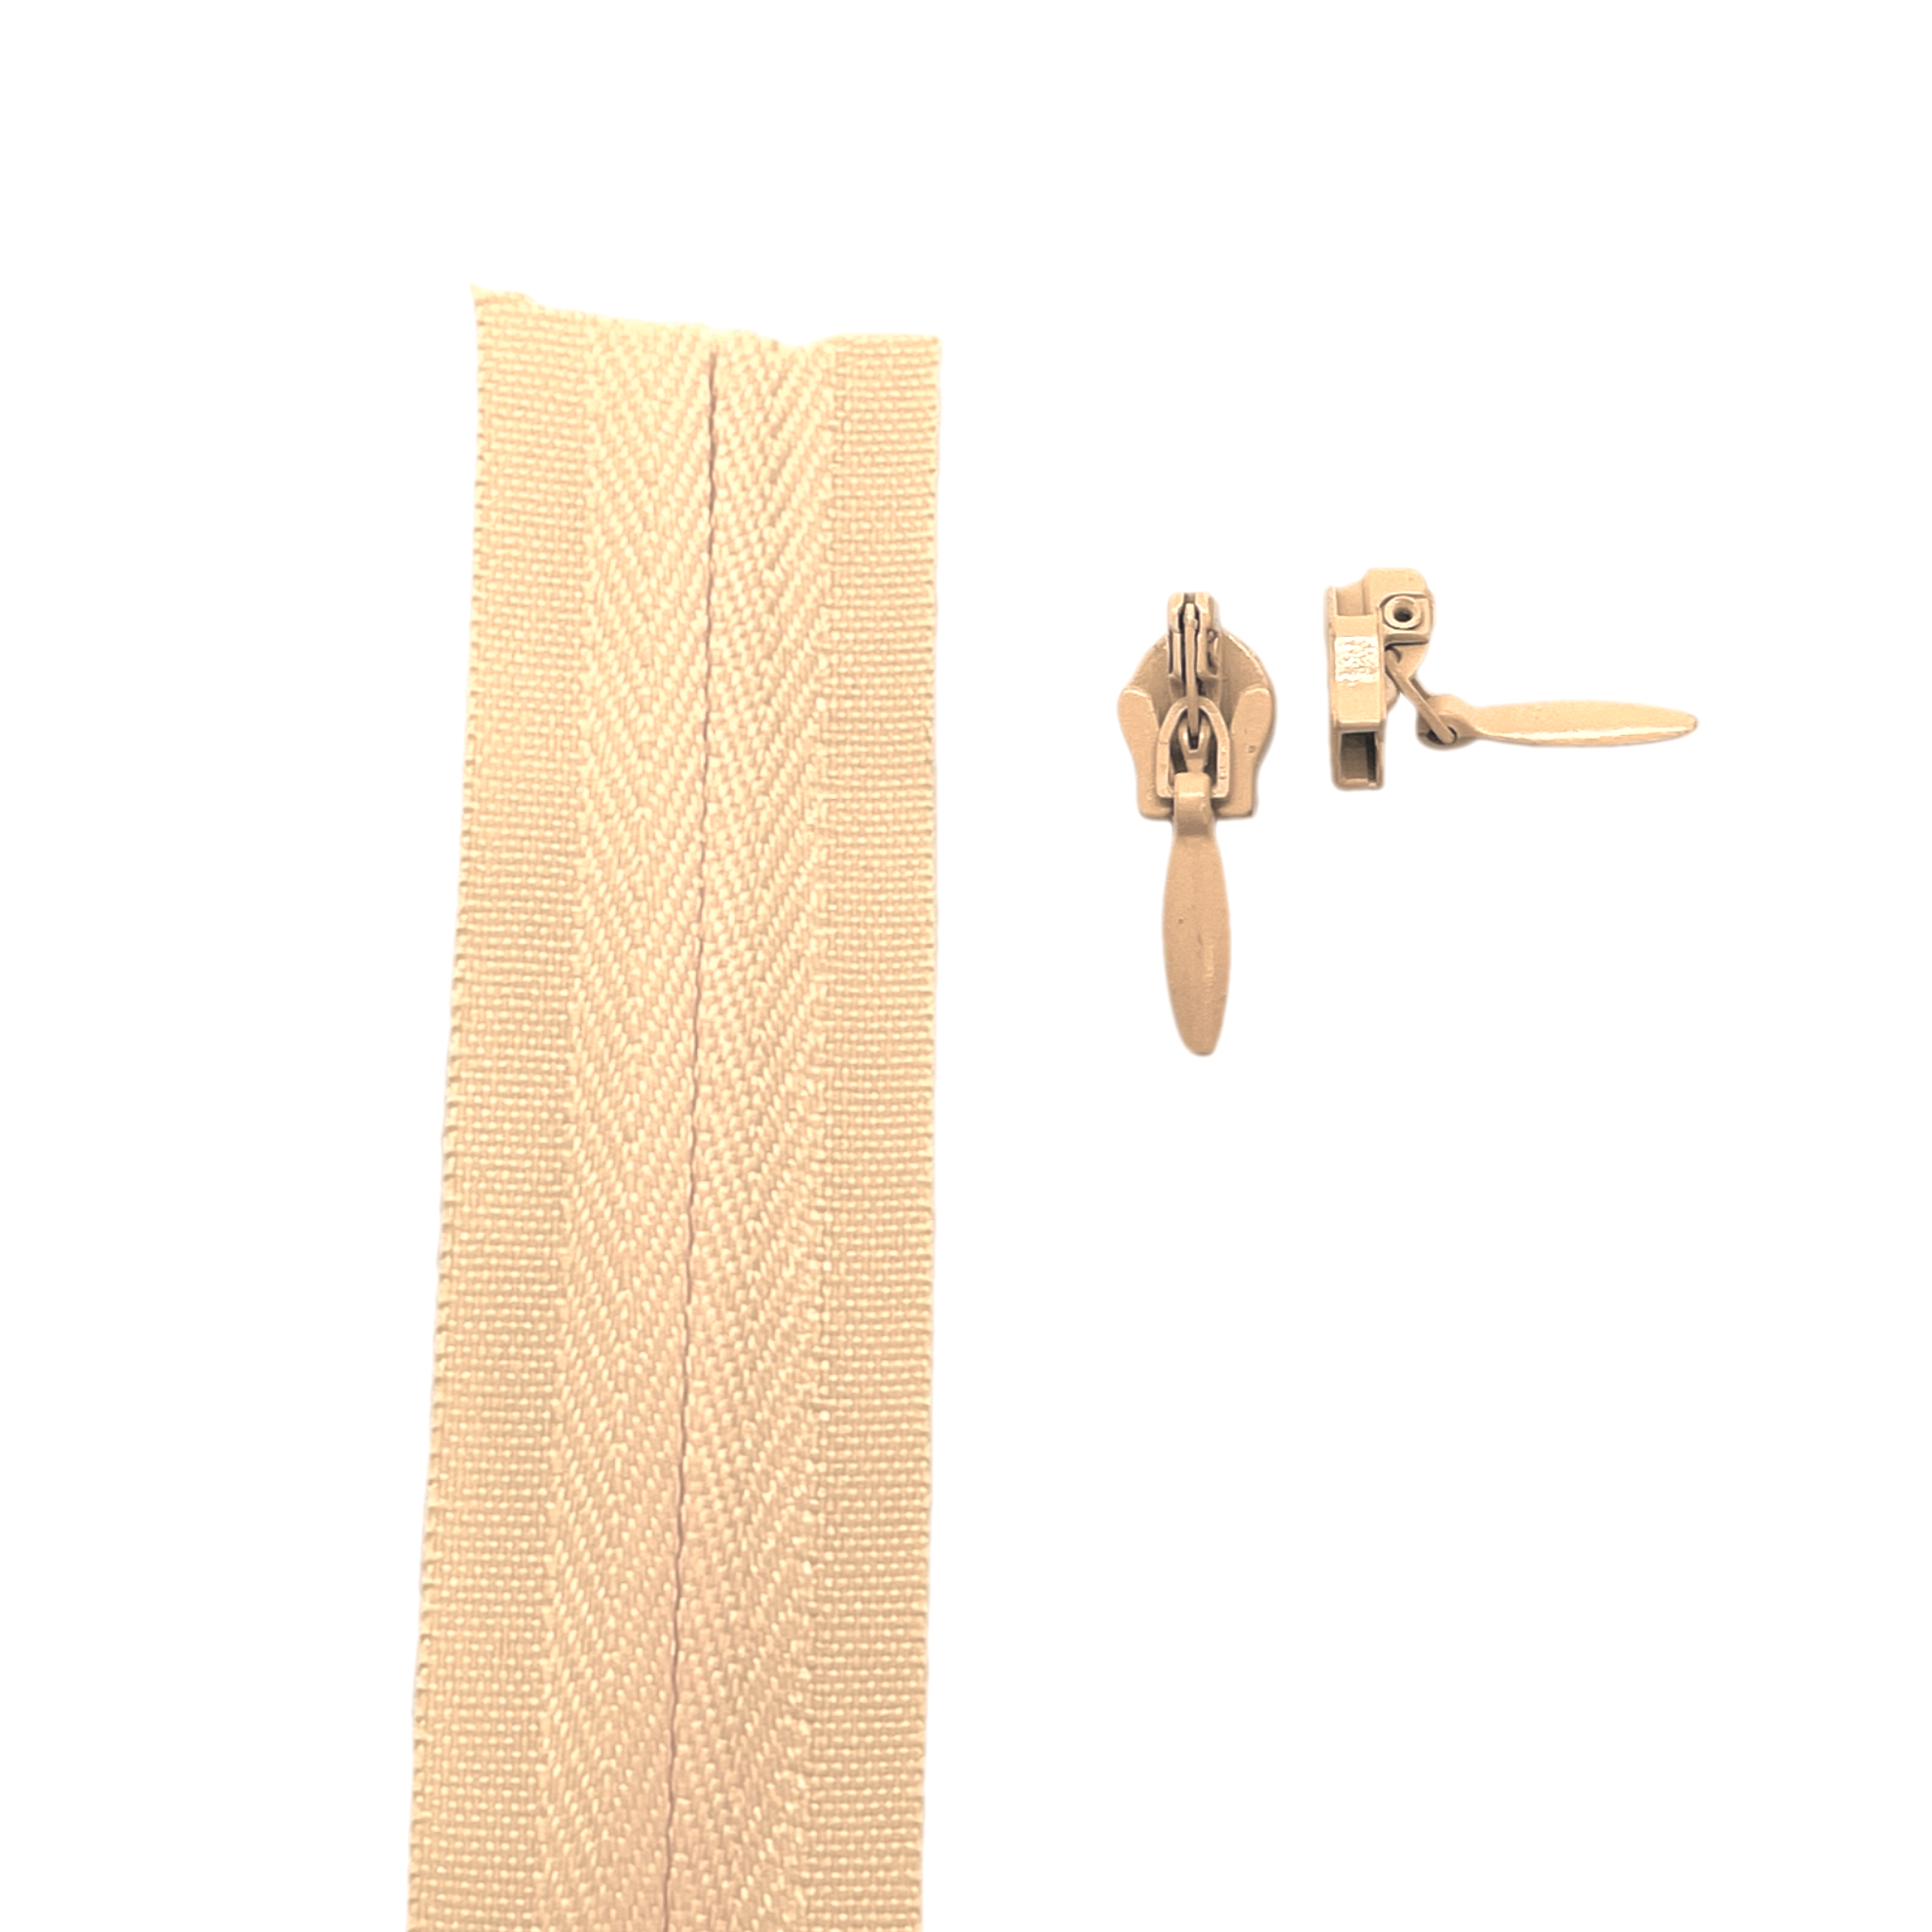 cream Invisible continuous zipper roll in long chain style with sliders of 2 per metre